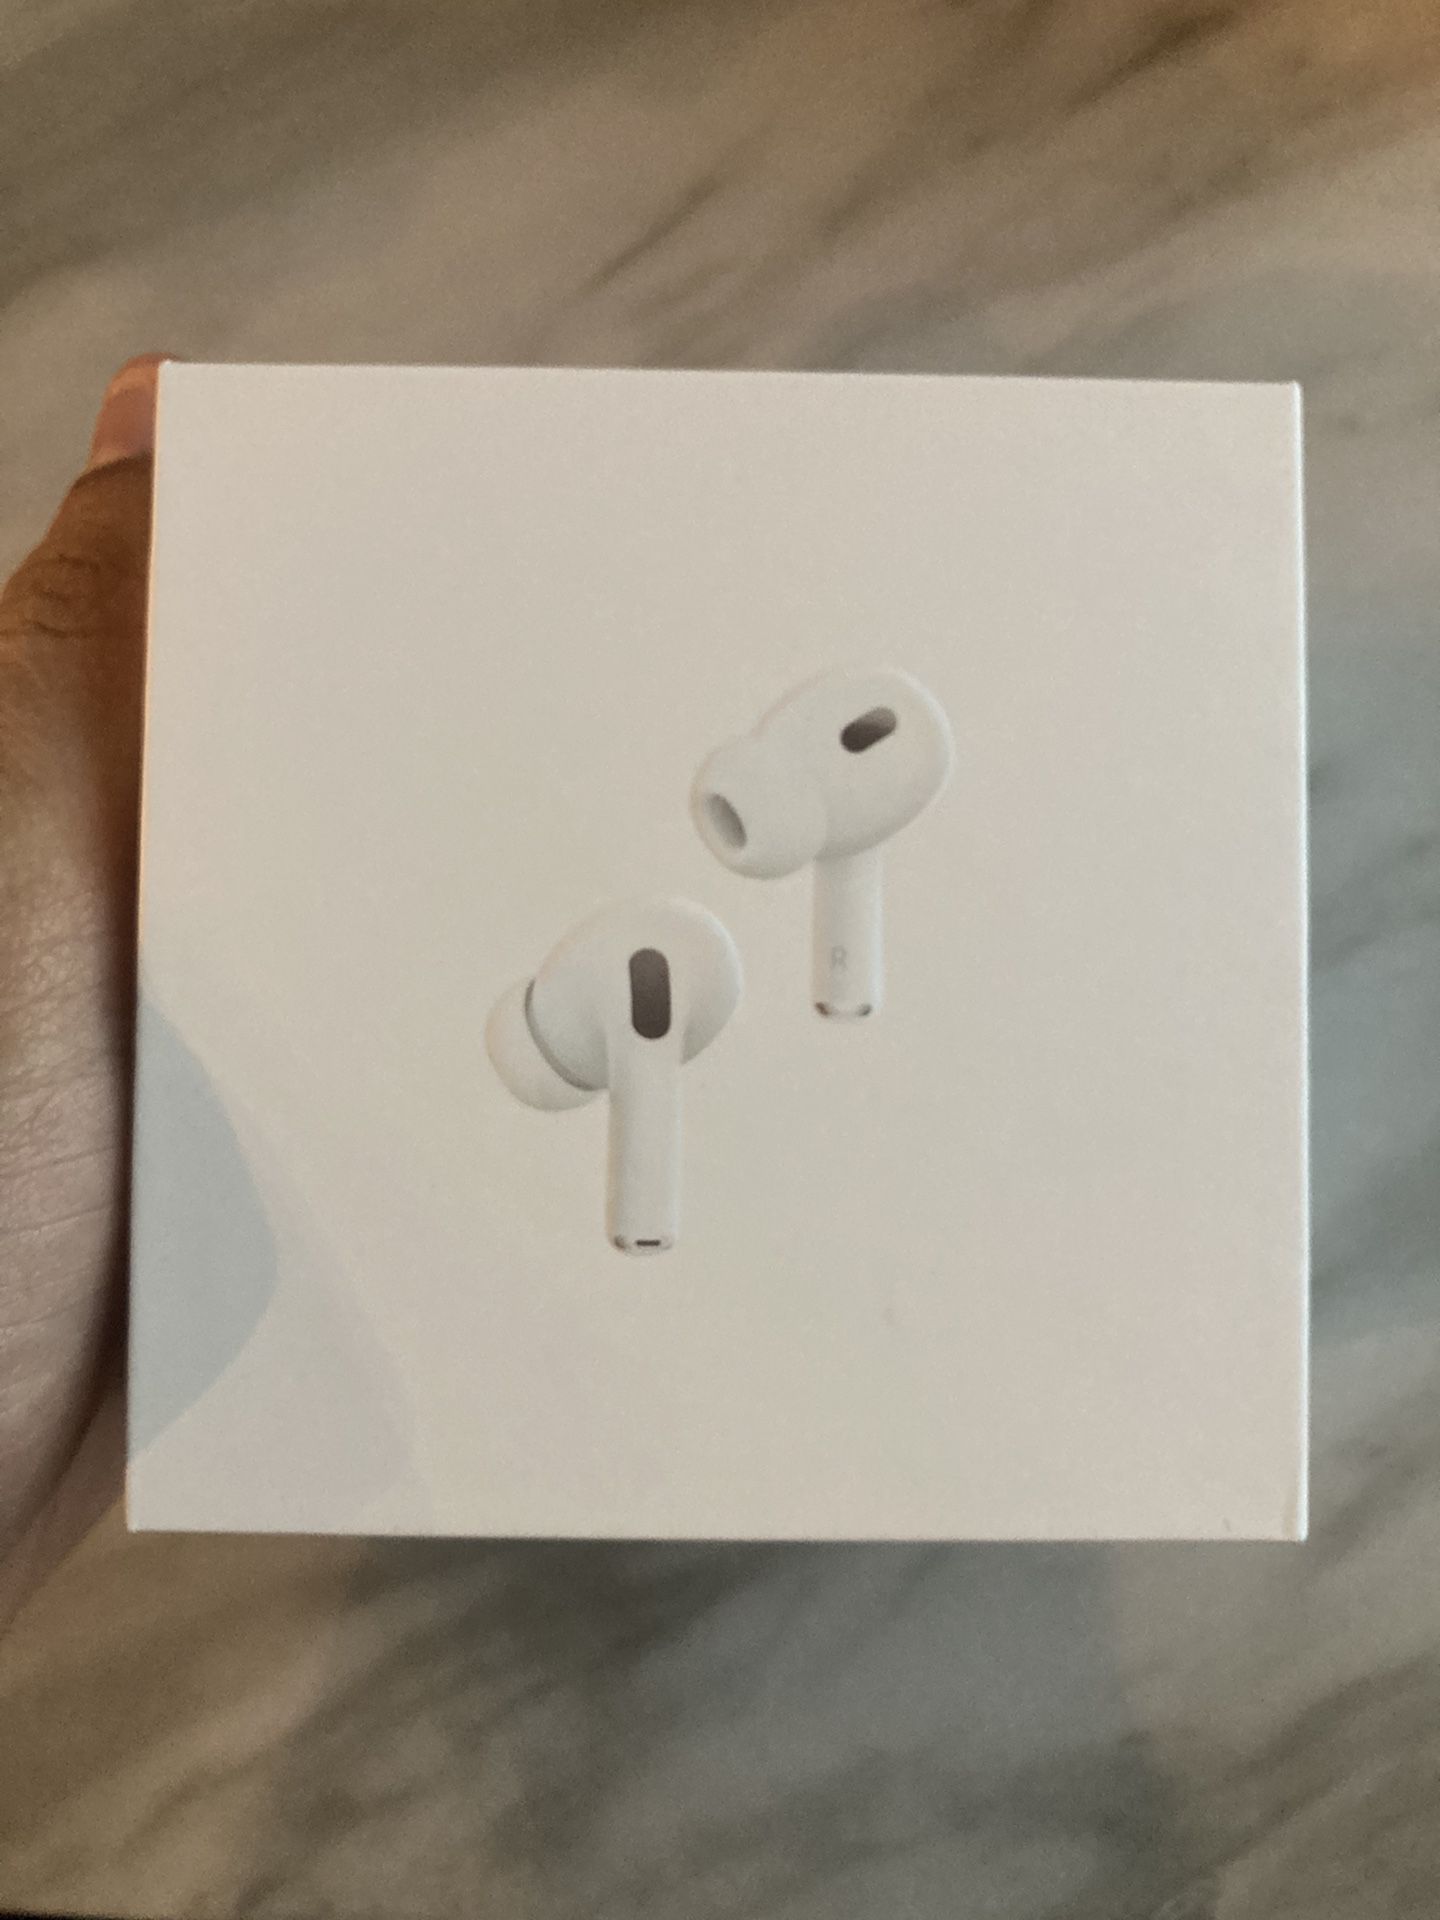 New AirPods Pro 2 (2nd Generation)